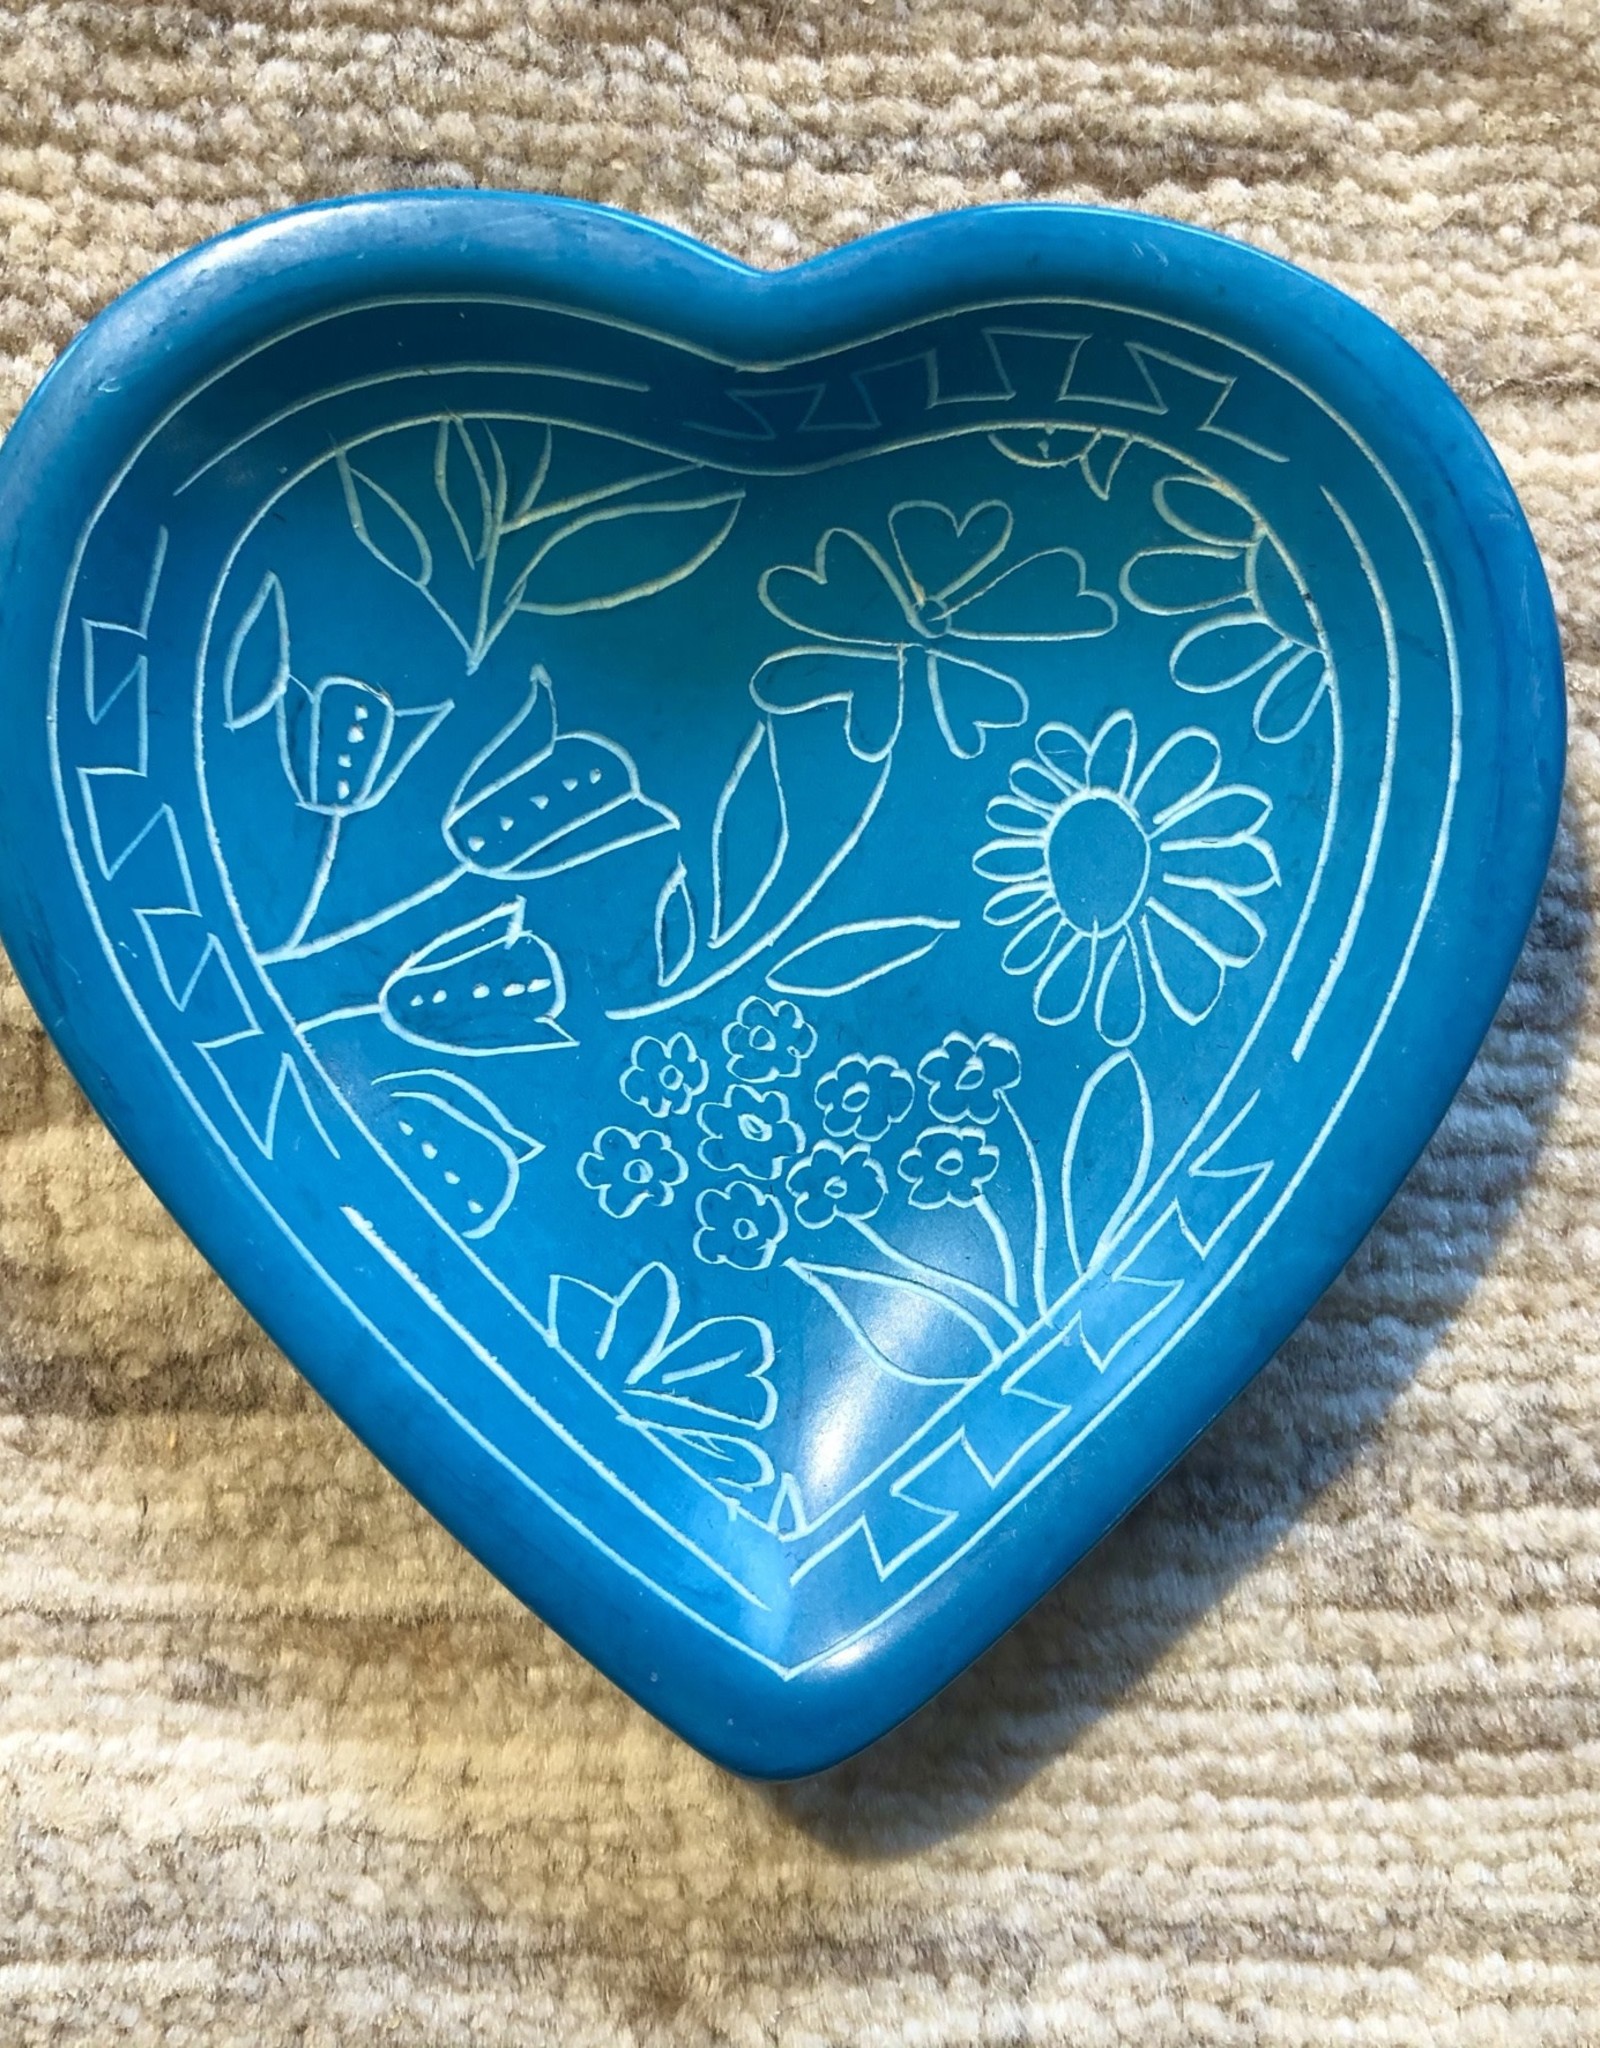 Venture Imports Pattern Heart Dishes